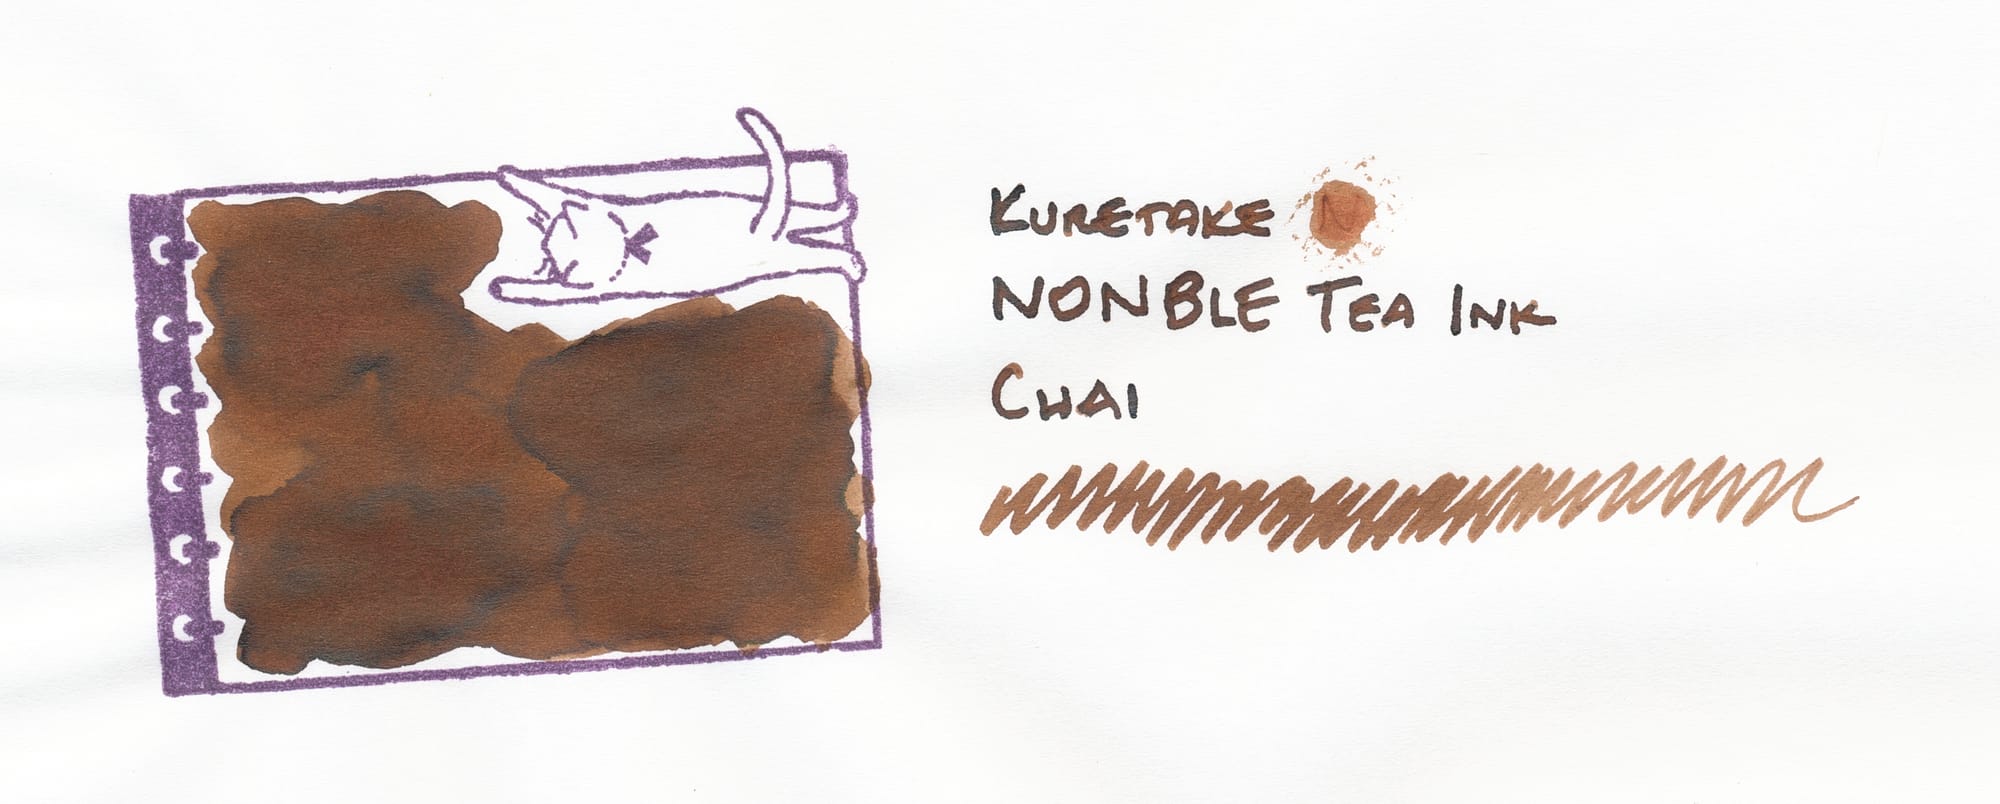 Ink swatch painted into a rubber stamped image of a cat hanging on to the right side of a notebook page, Kuretake NONBLE Tea Ink, Chai